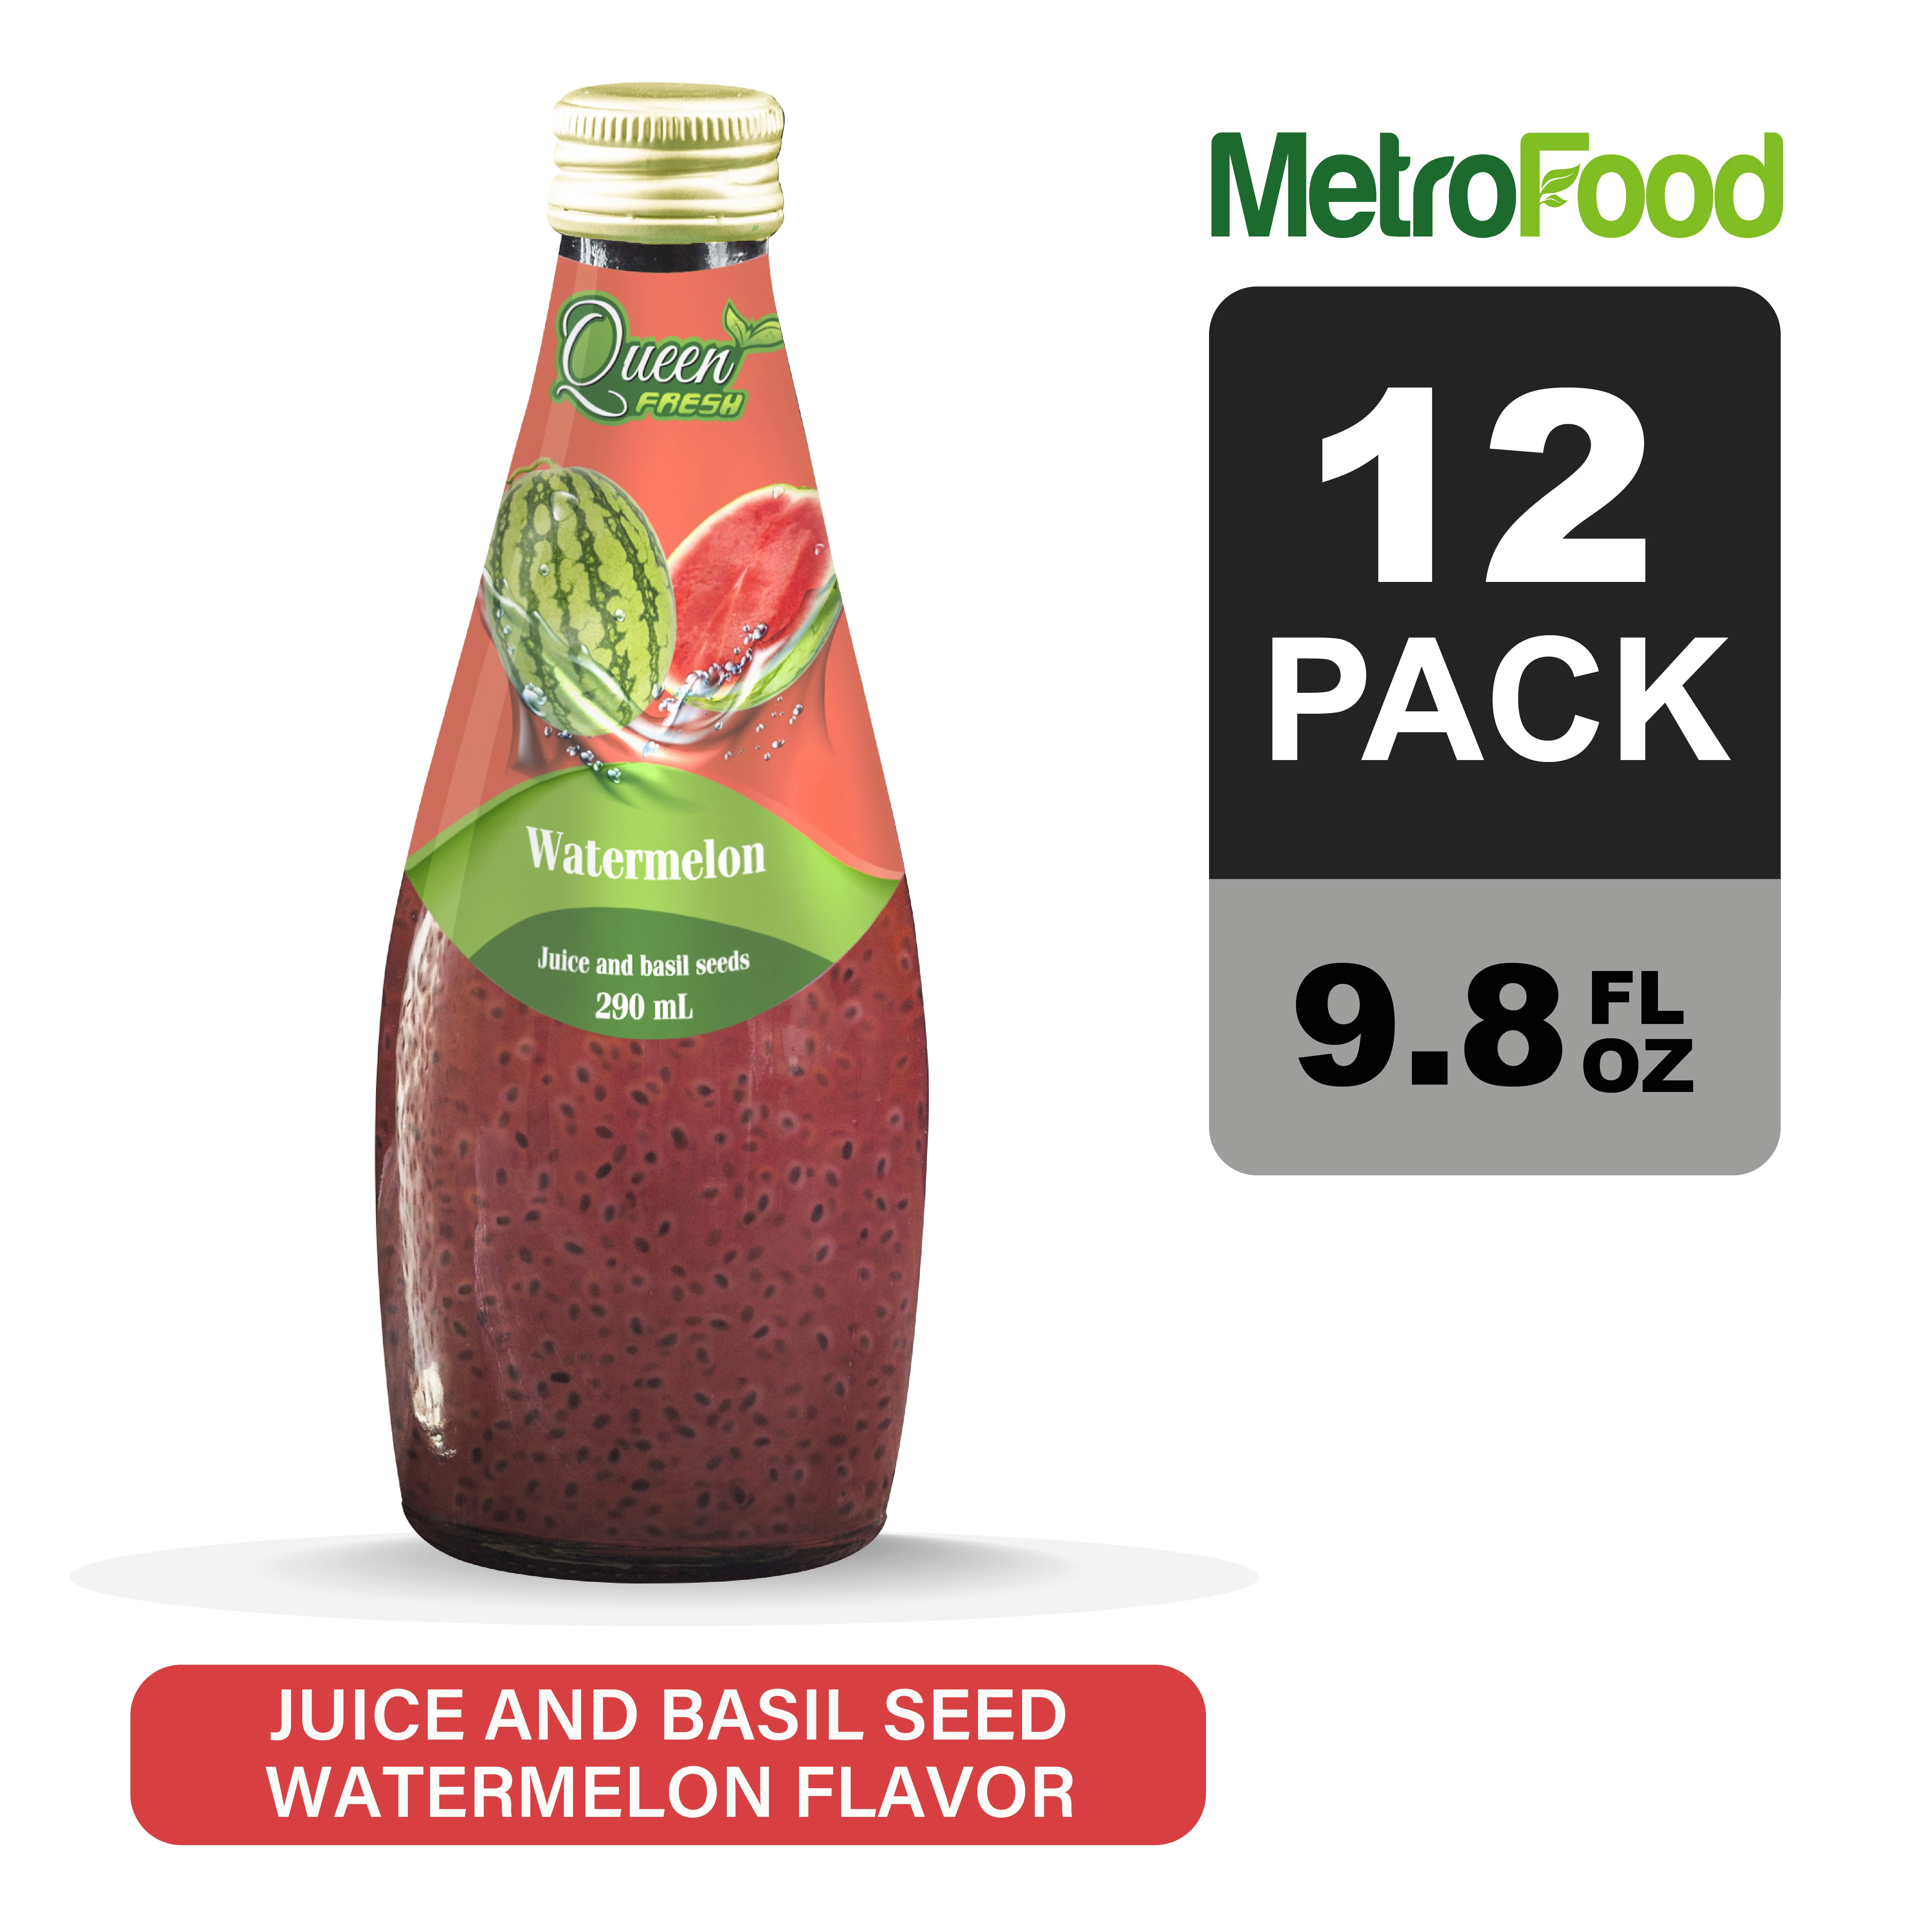 OEM/ODM/Private Label - 290ml High Quality Basil Seed Drink from Vietnam - Watermelon Flavor